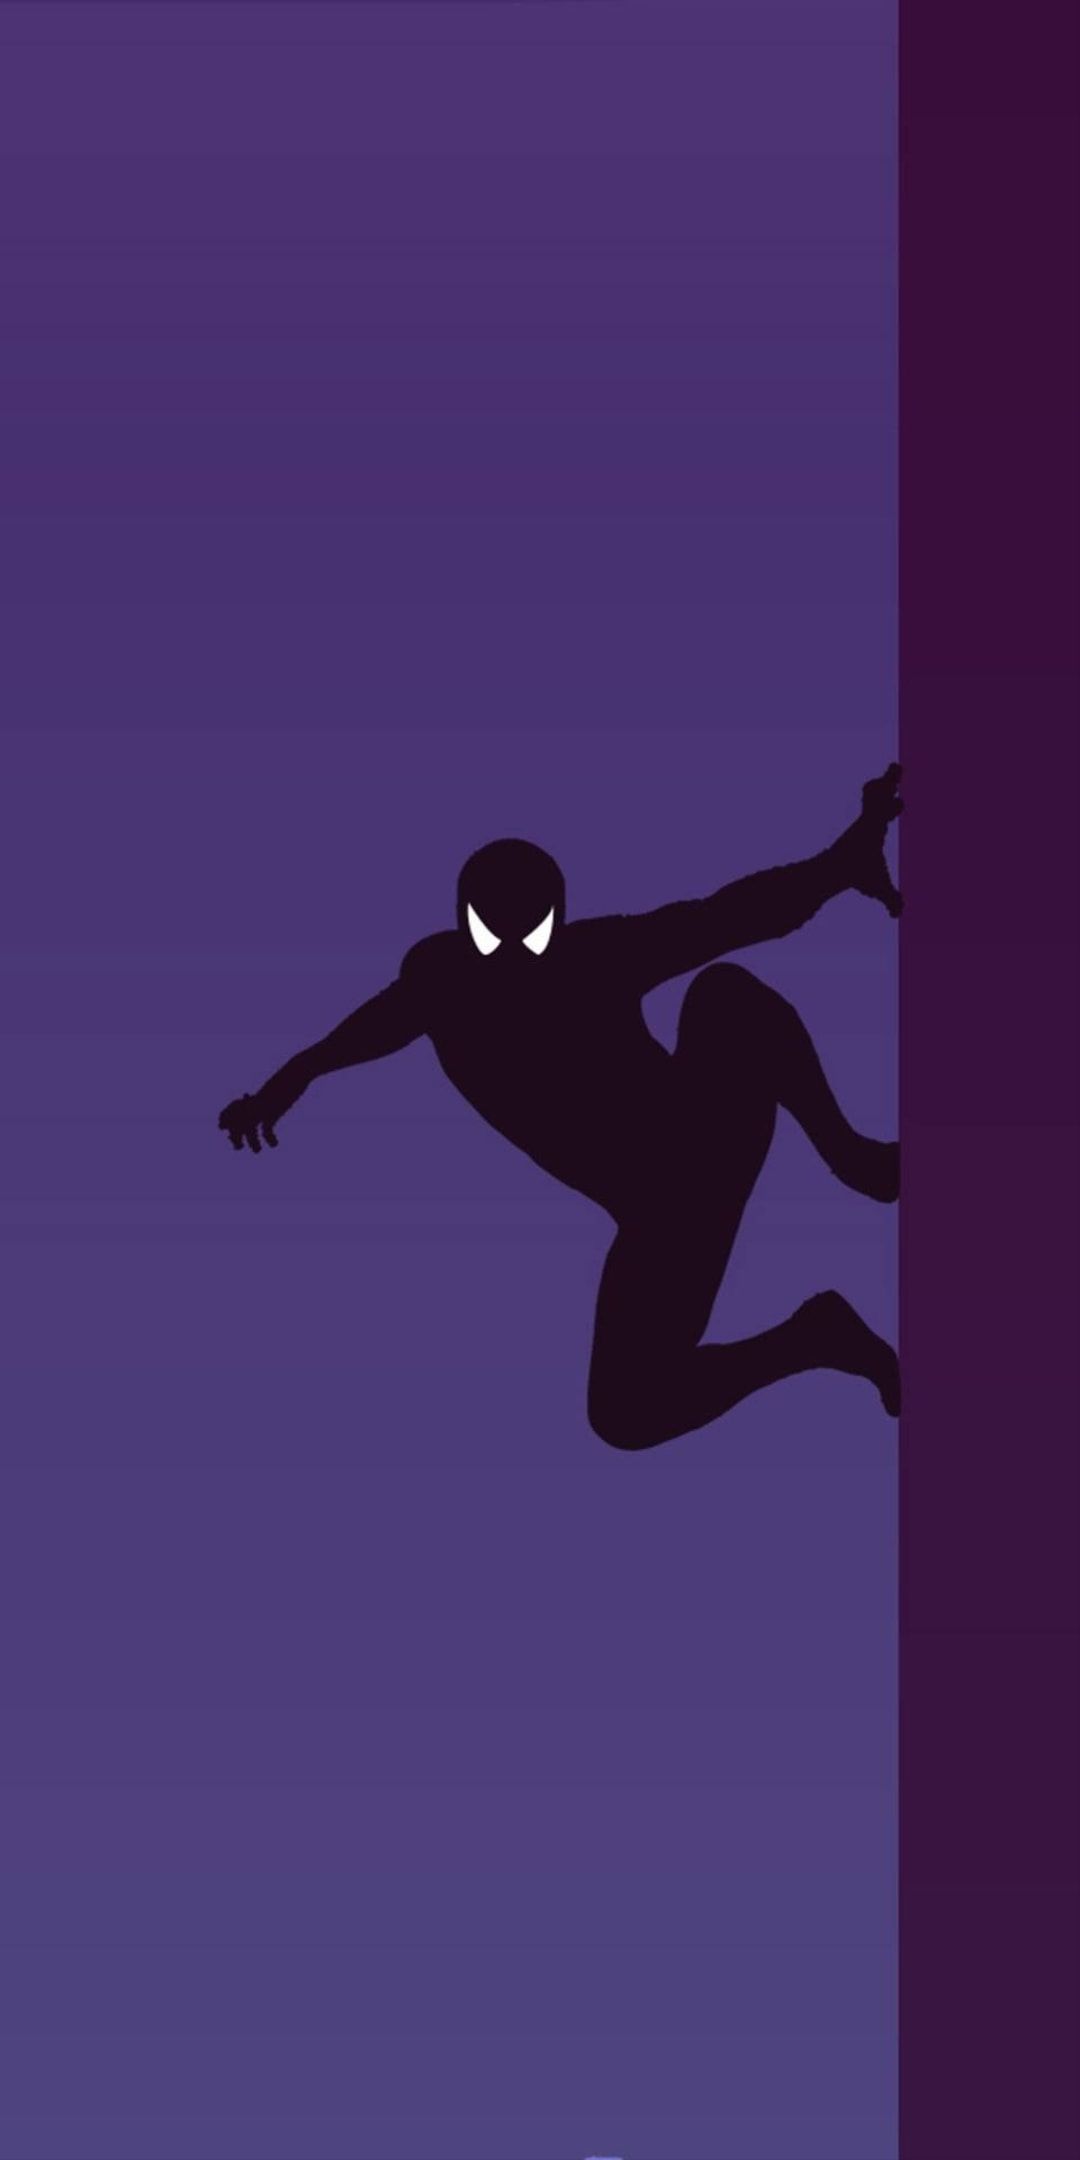 Amoled Spider Man iPhone Wallpaper. Android wallpaper, iPhone